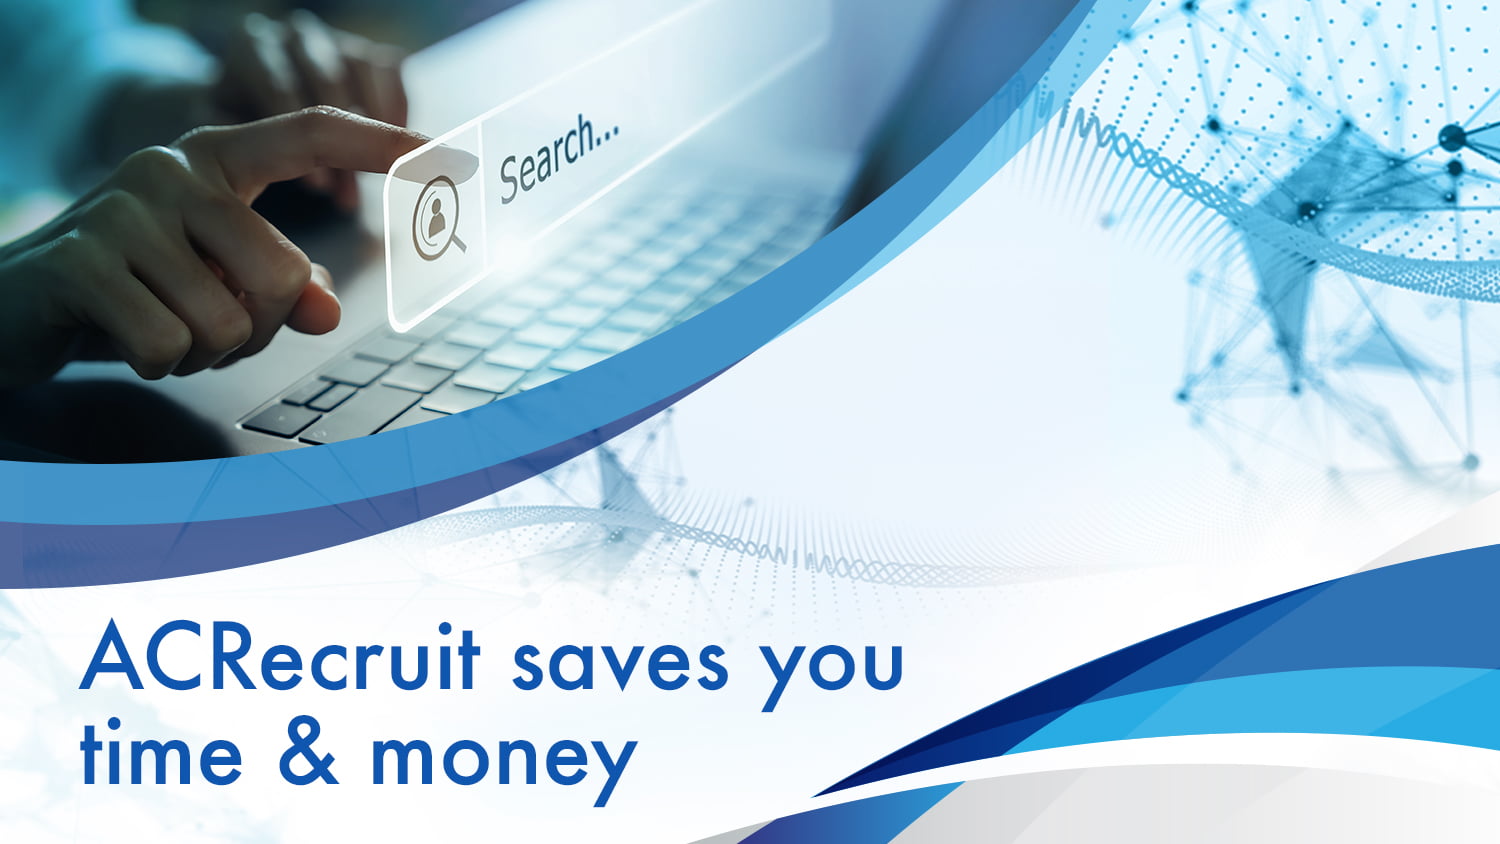 ACRecruit saves you time and money